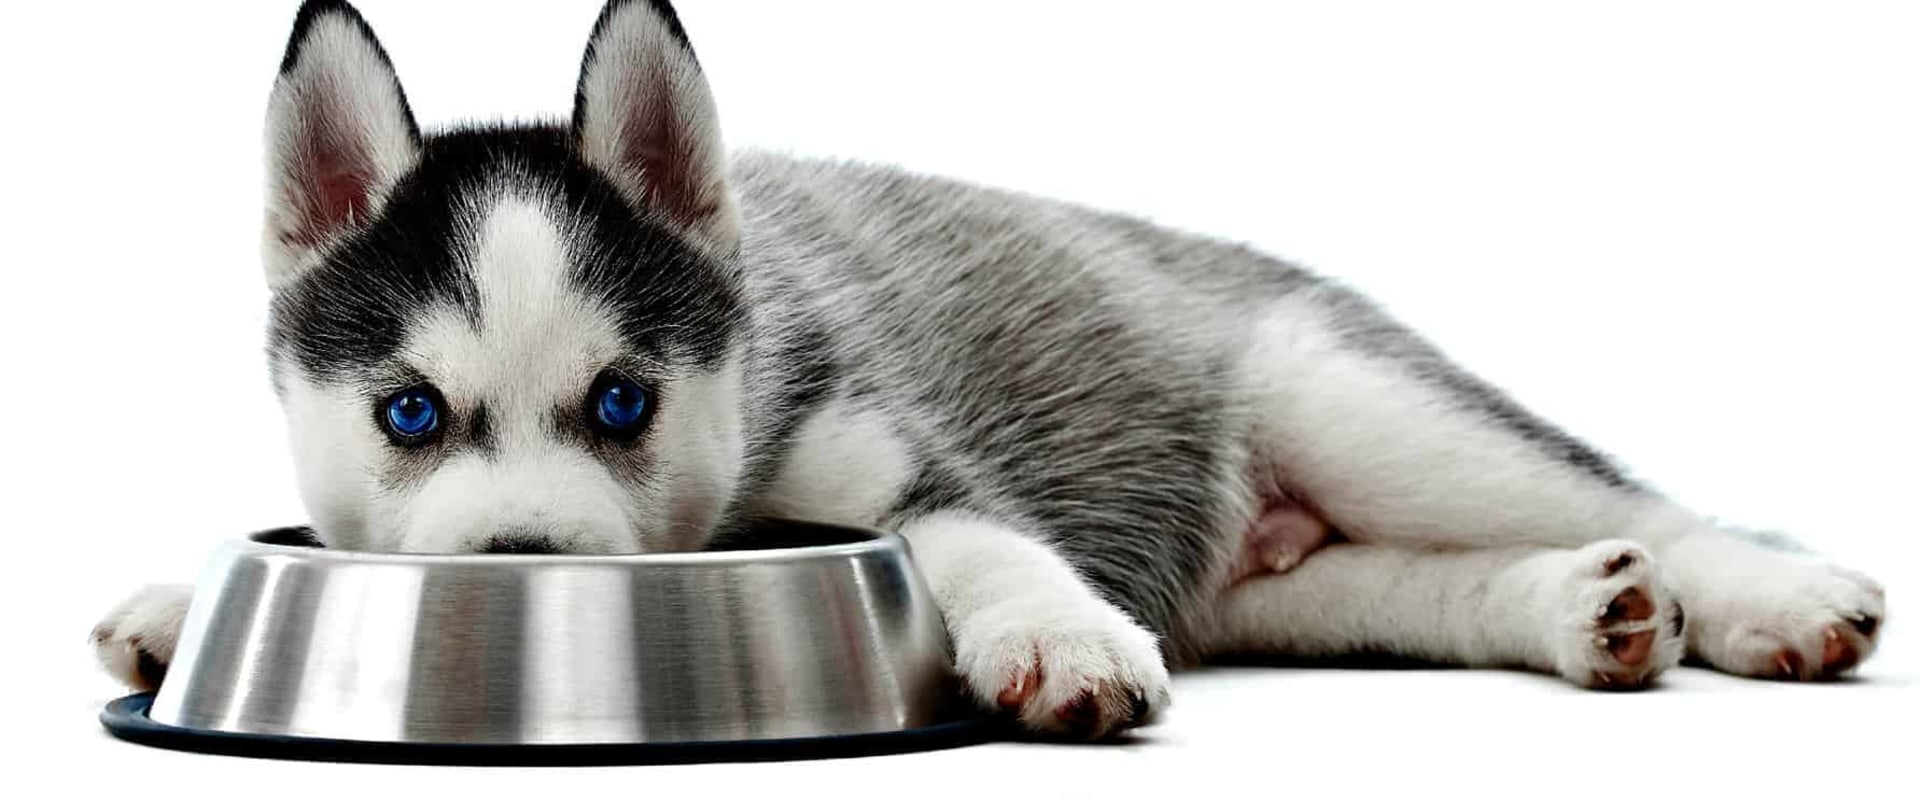 Is grain free dog food better for your dog?